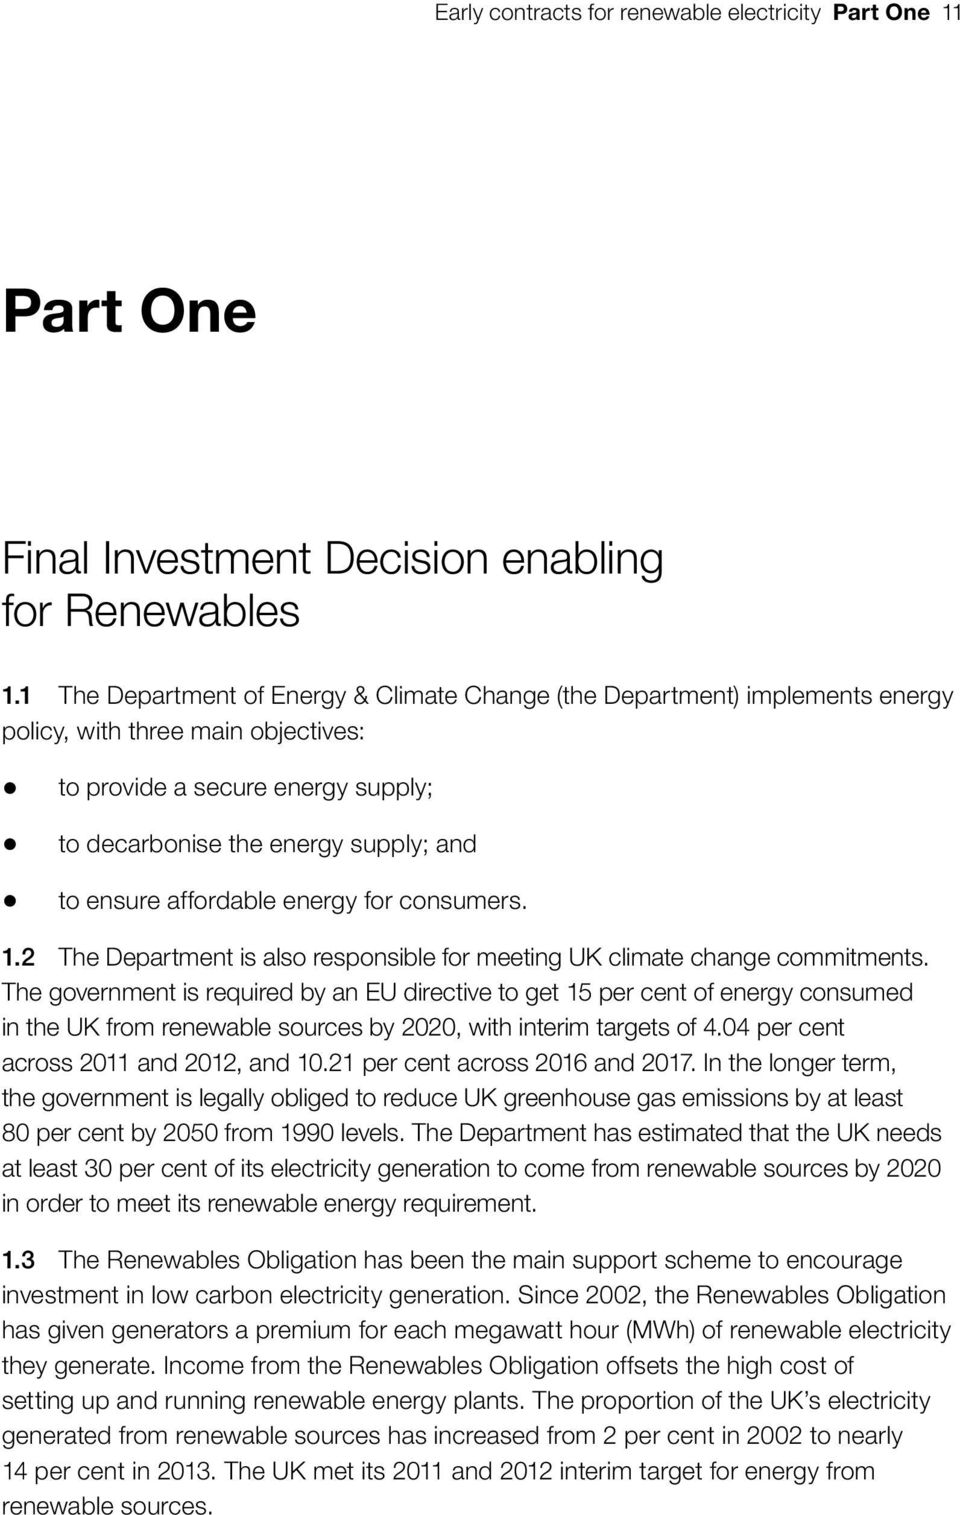 affordable energy for consumers. 1.2 The Department is also responsible for meeting UK climate change commitments.